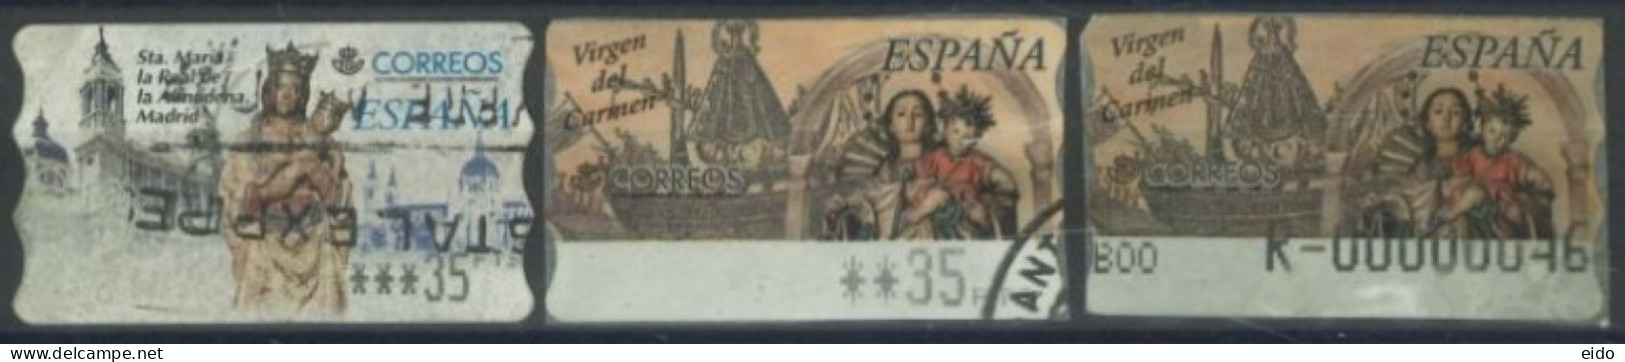 SPAIN - 2000 - ST. MARIA  AND VIRGIN OF CARMEN . STAMPS LABELS SET OF 3 OF DIFFERENT VALUES, USED . - Gebruikt